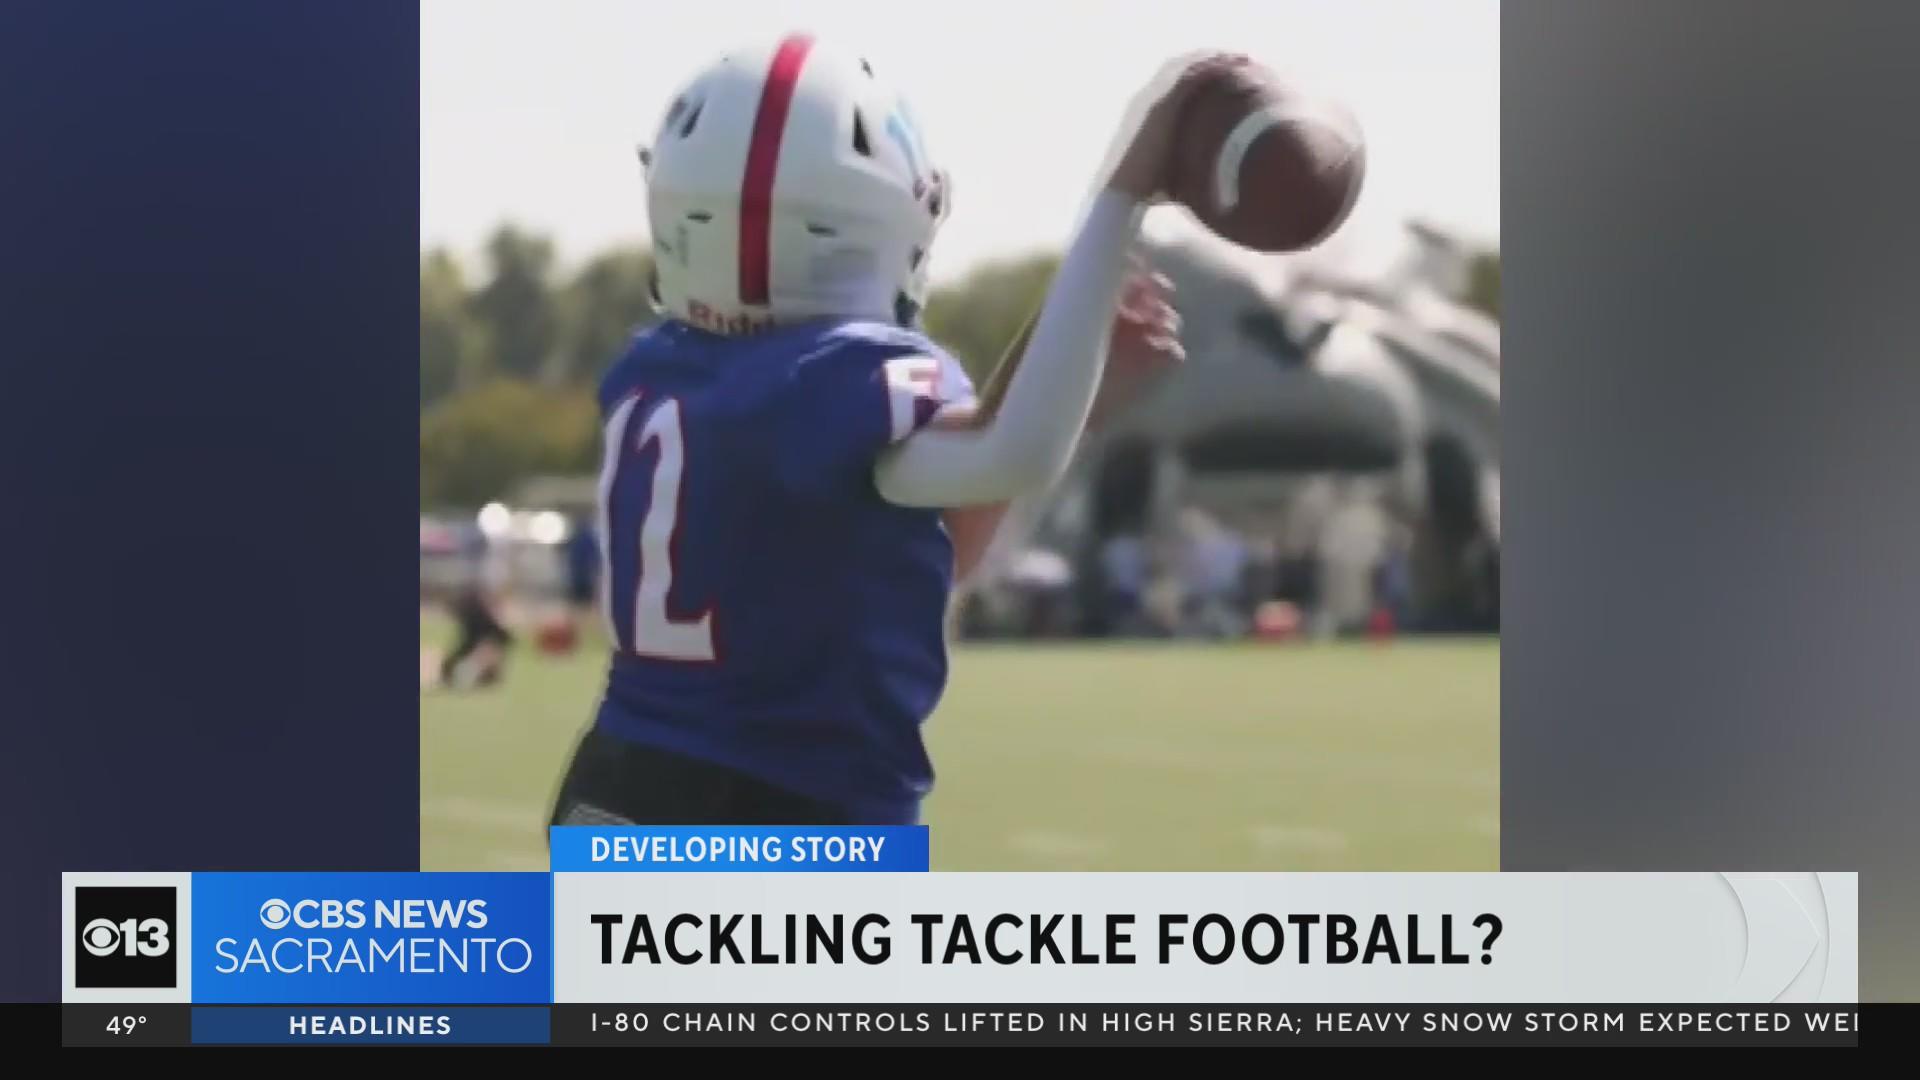 New California bill aims to ban tackle football for kids under 12